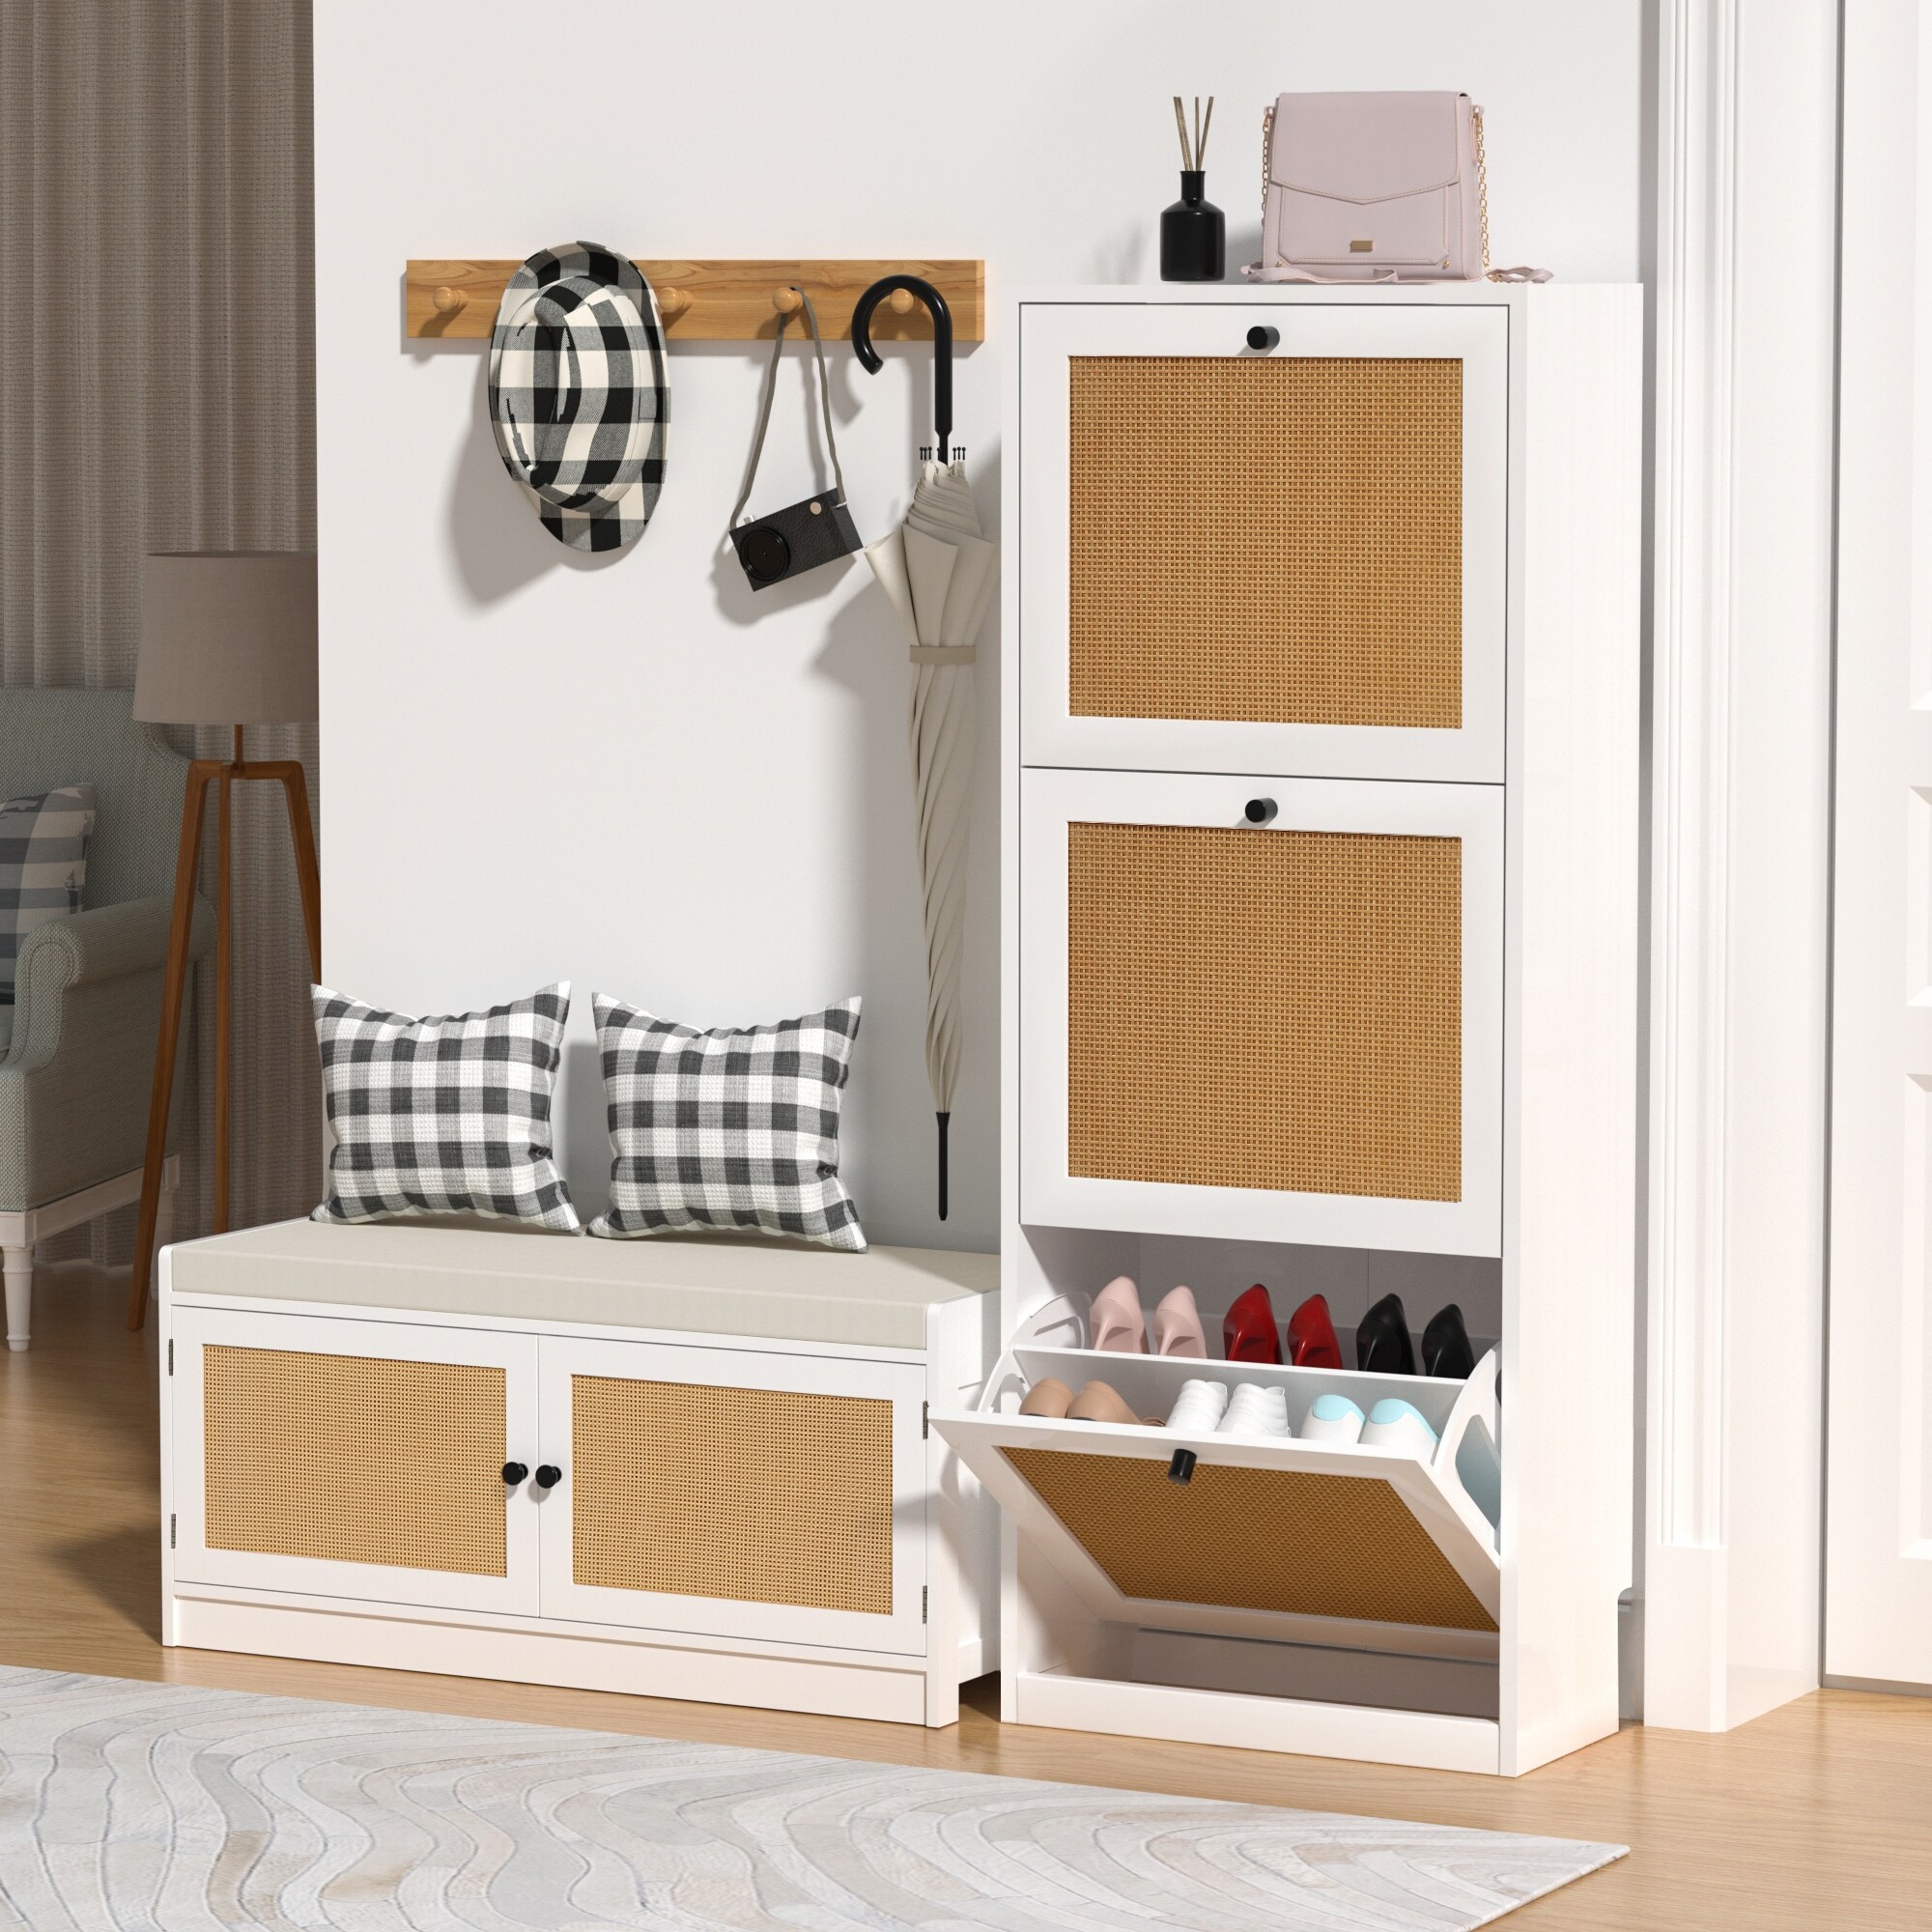 https://ak1.ostkcdn.com/images/products/is/images/direct/ec2c824550aaa815f871a2d9b104afd41b663b3f/Anmytek-3-Layer-White-Wood-Rattan-Shoe-Cabinet-with-3-Flip-Drawer-Narrow-Shoe-Storage-Organizer.jpg